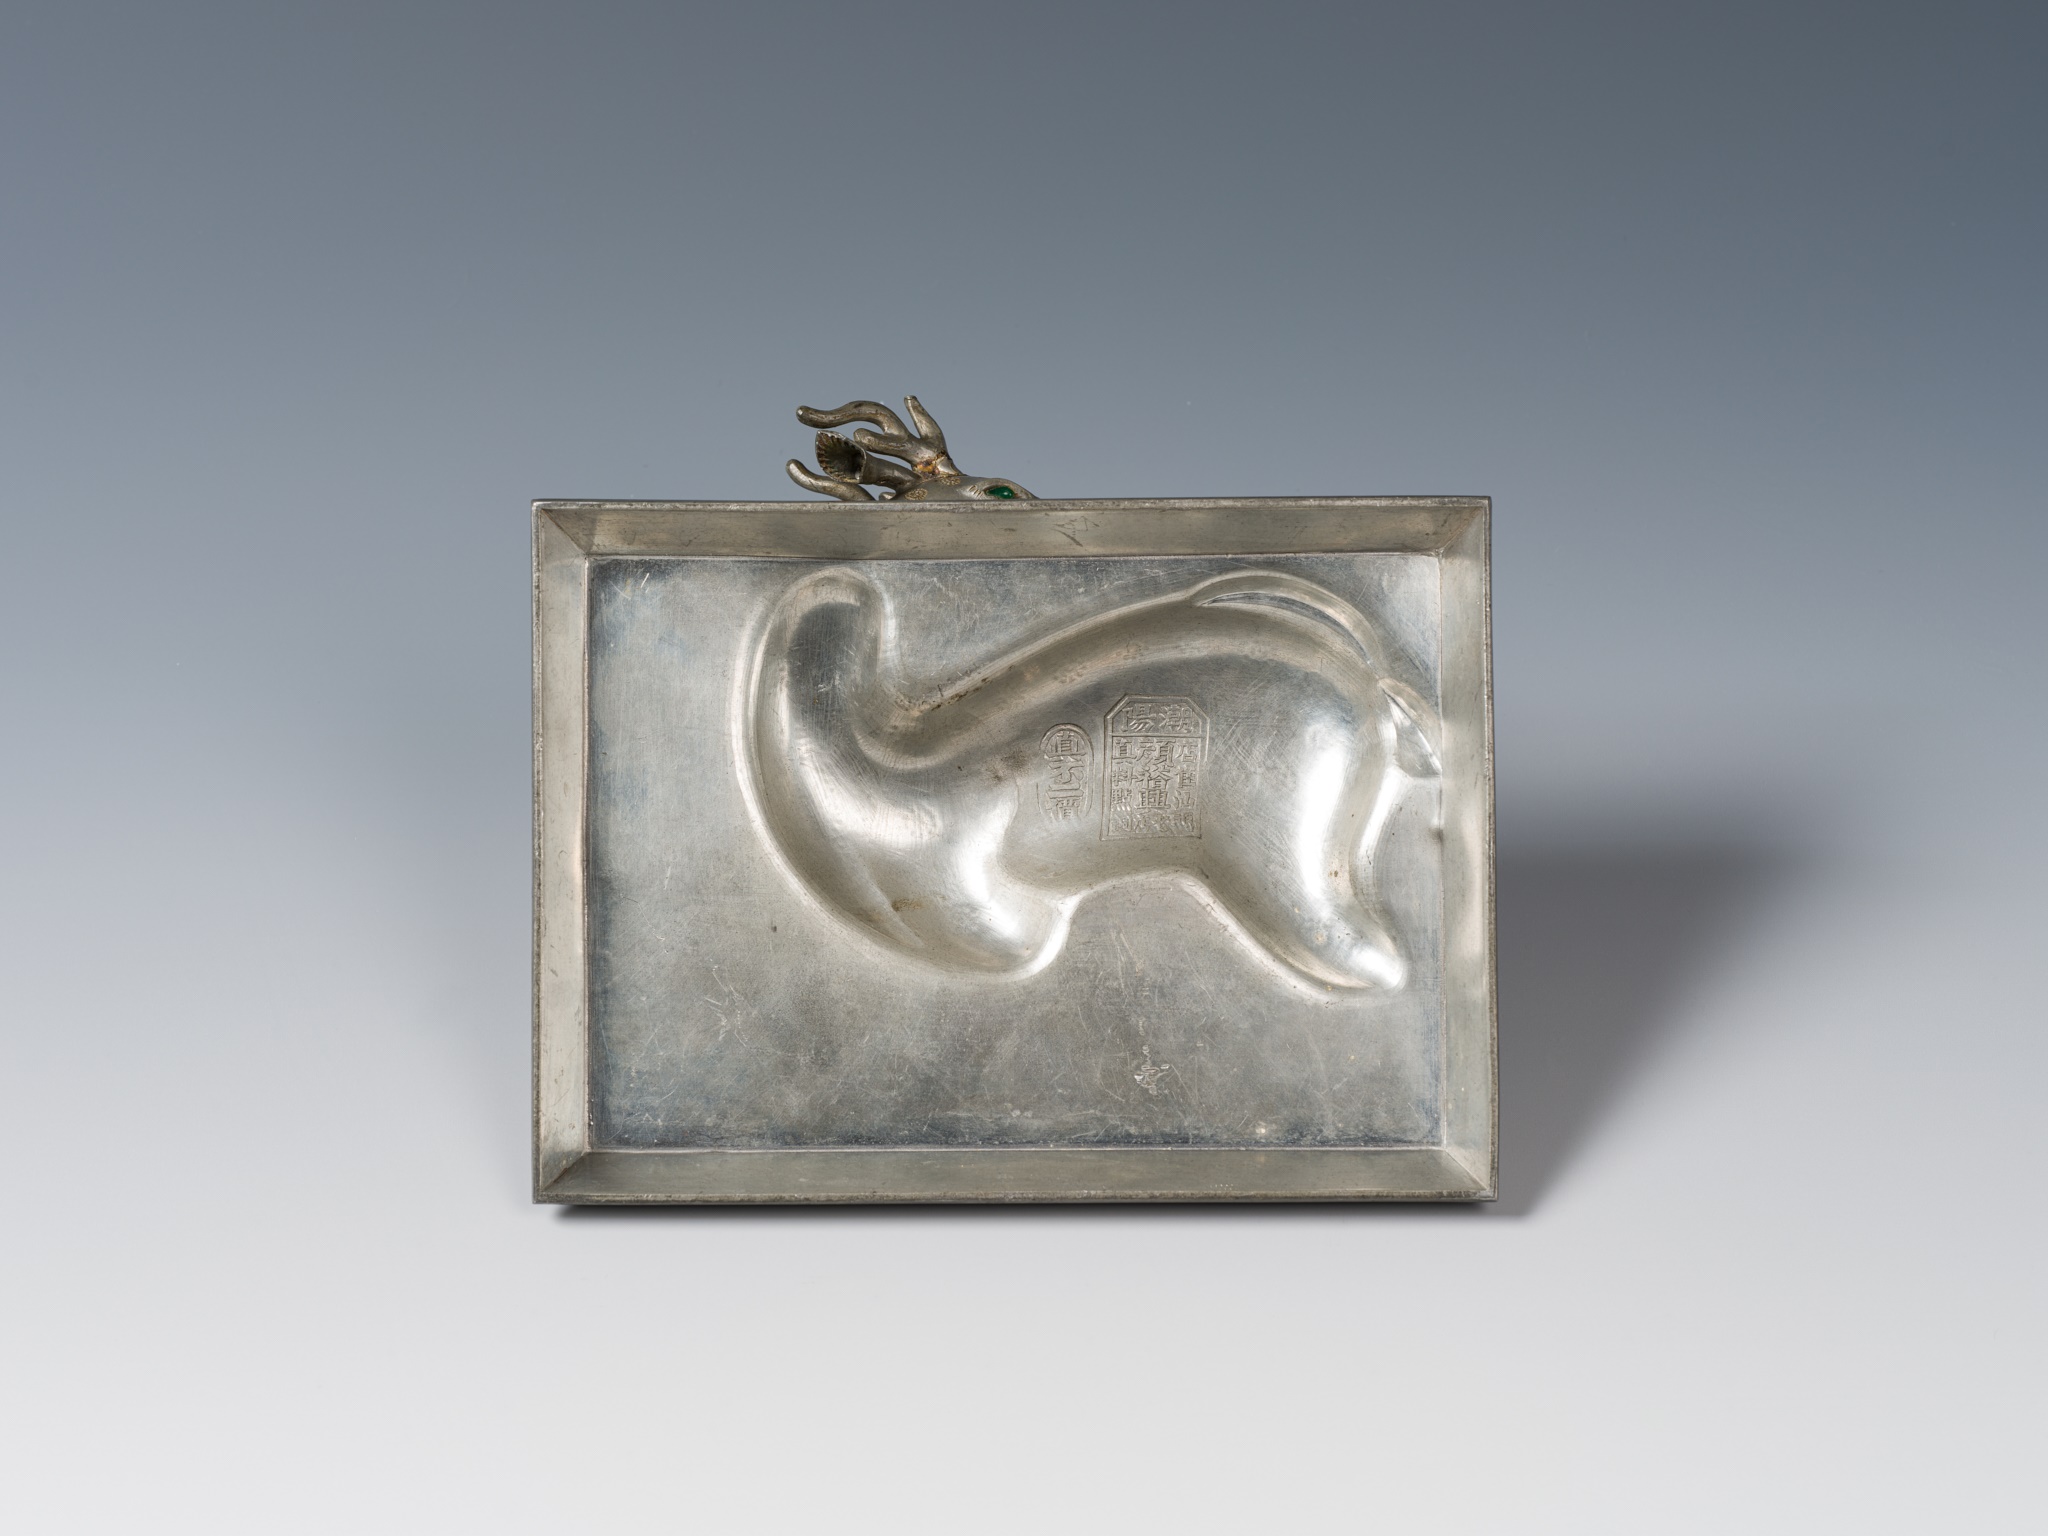 A JADE-INLAID PEWTER 'DEER WITH LINGZHI' ARCHAISTIC VESSEL AND COVER, FU, QING DYNASTY - Image 15 of 15